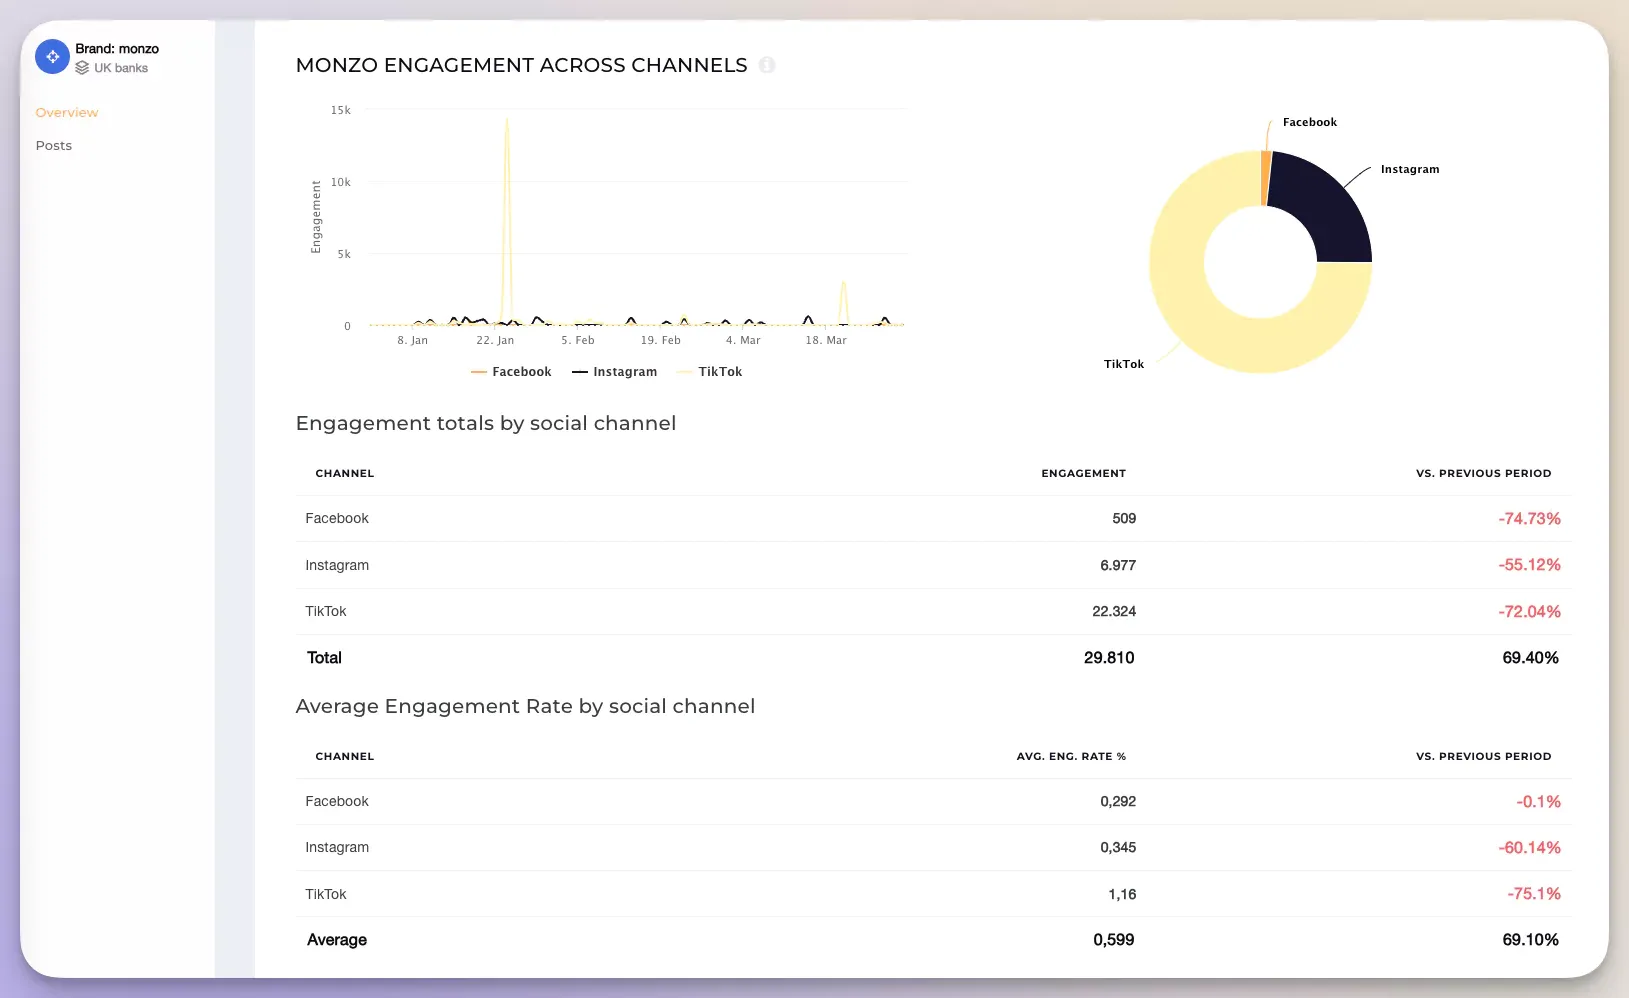 Here's the Socialinsider dashboard for a cross-channel analysis